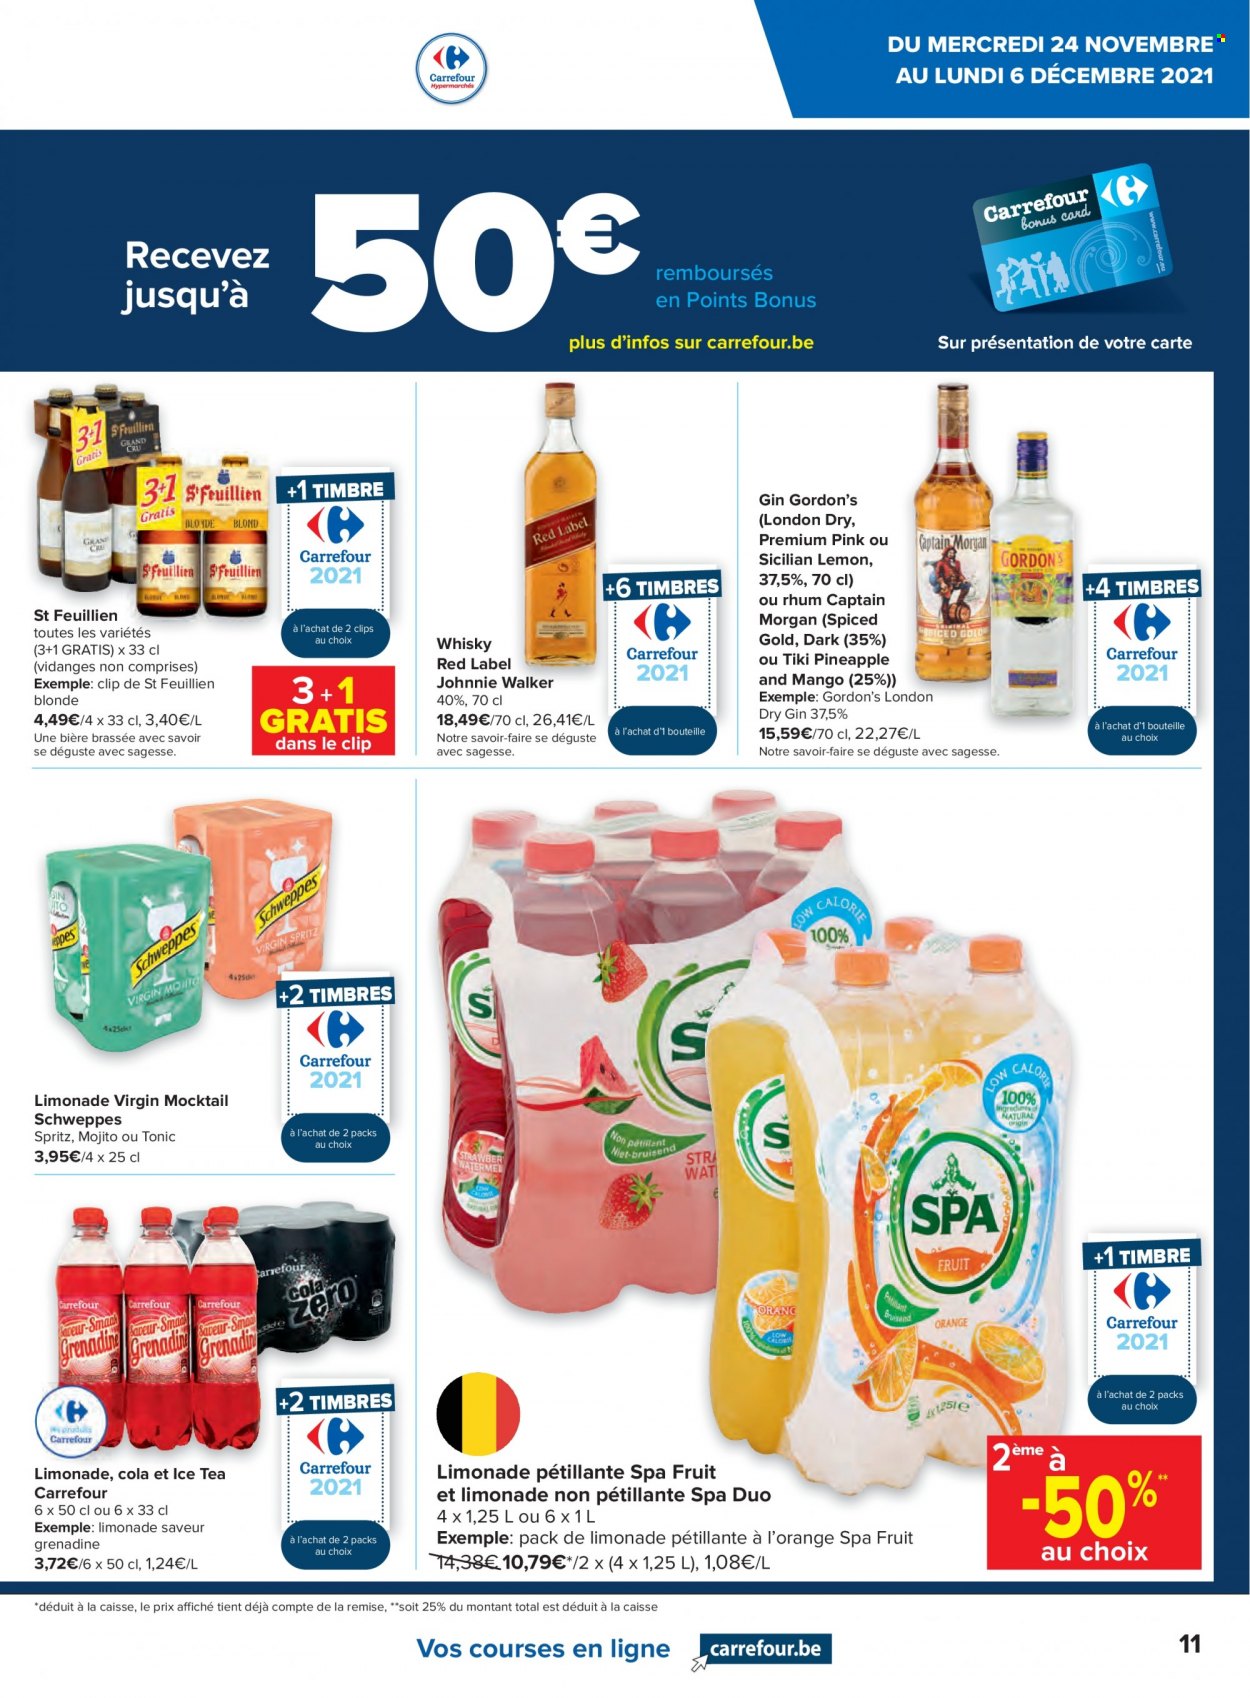 Catalogue Carrefour hypermarkt - 24.11.2021 - 6.12.2021. Page 11.